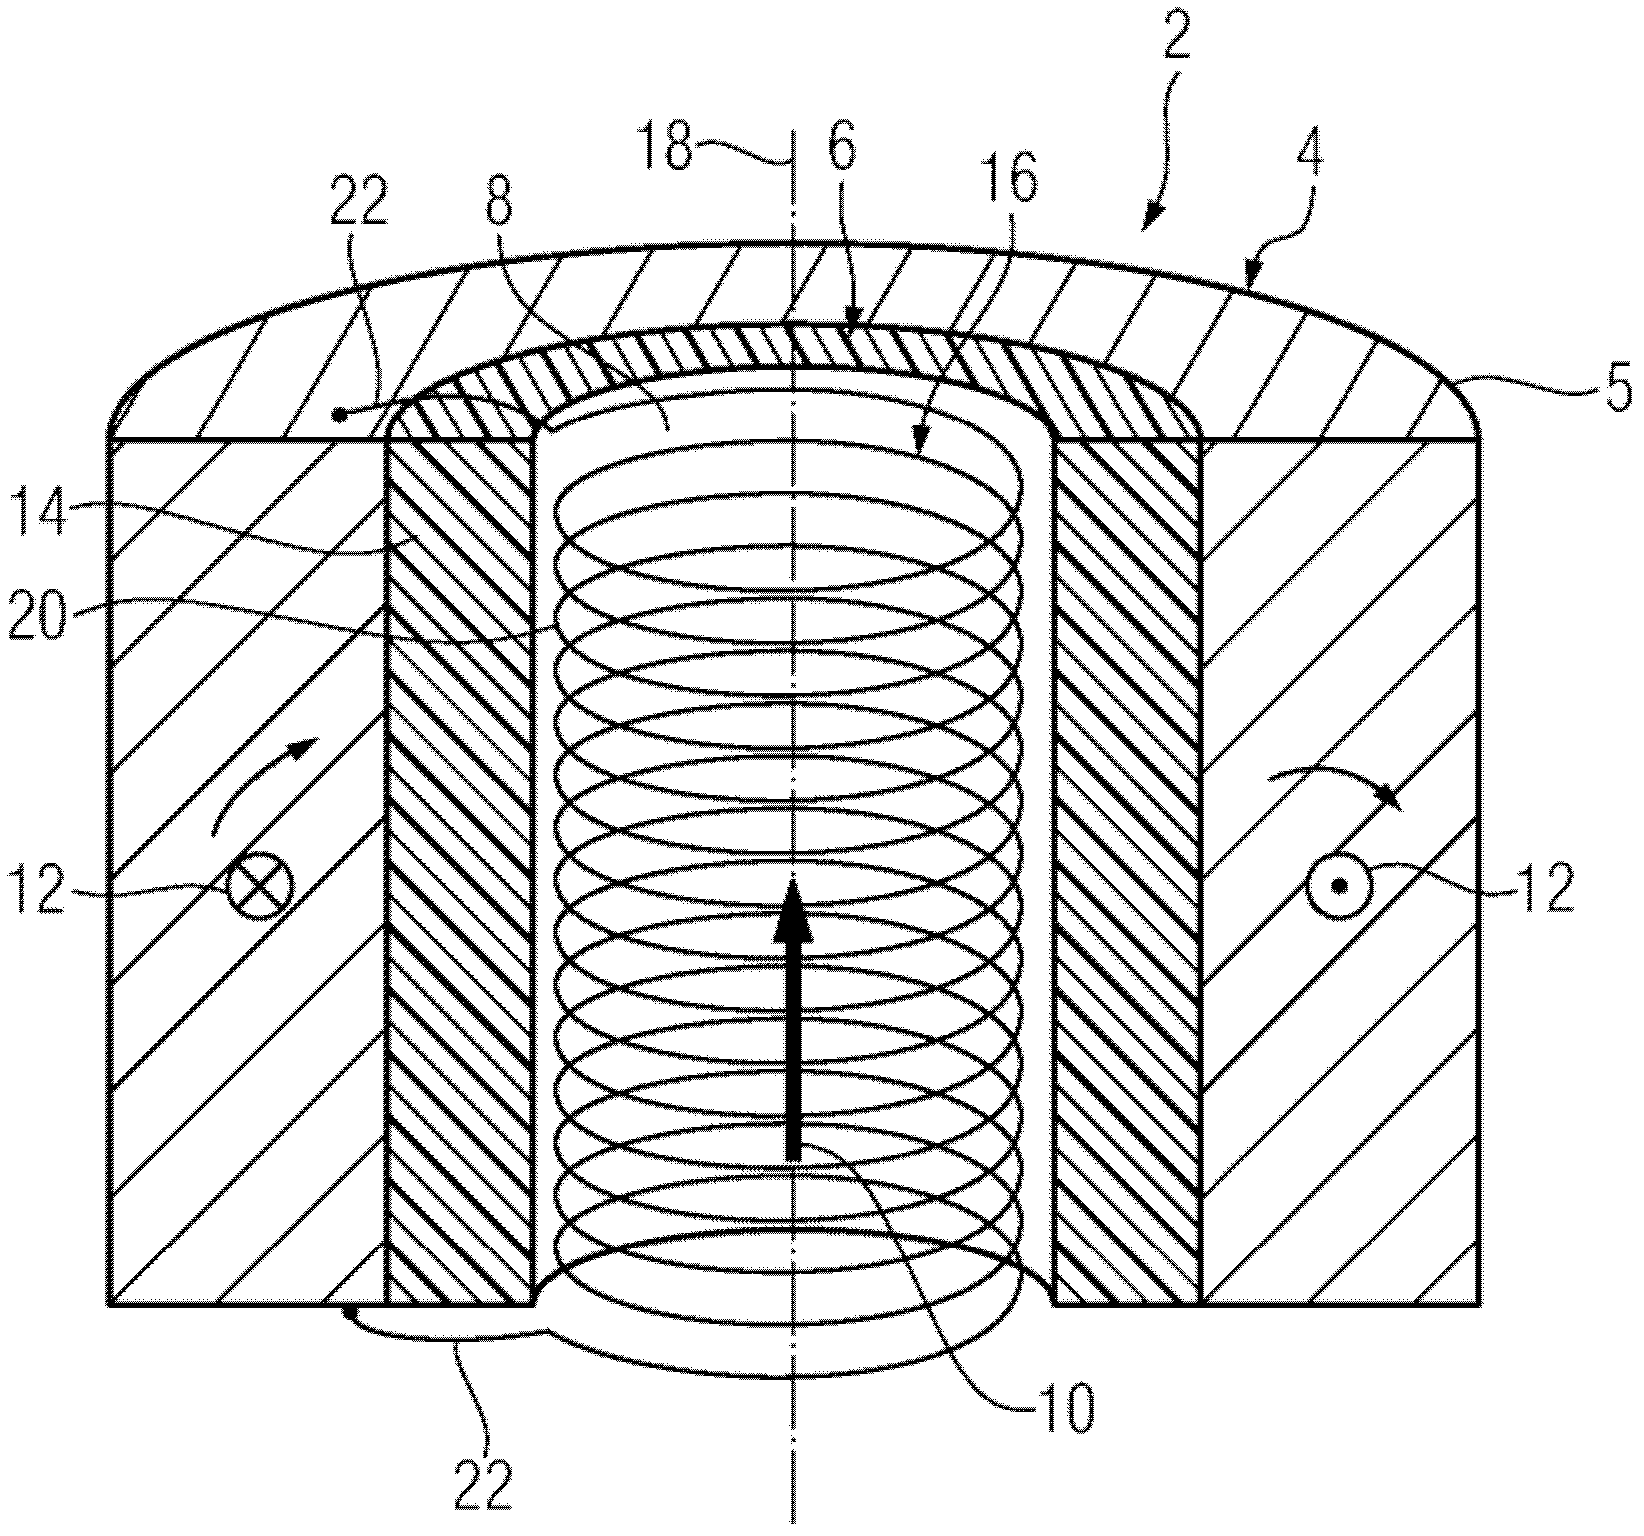 Radiation tubes and particle accelerators with radiation tubes